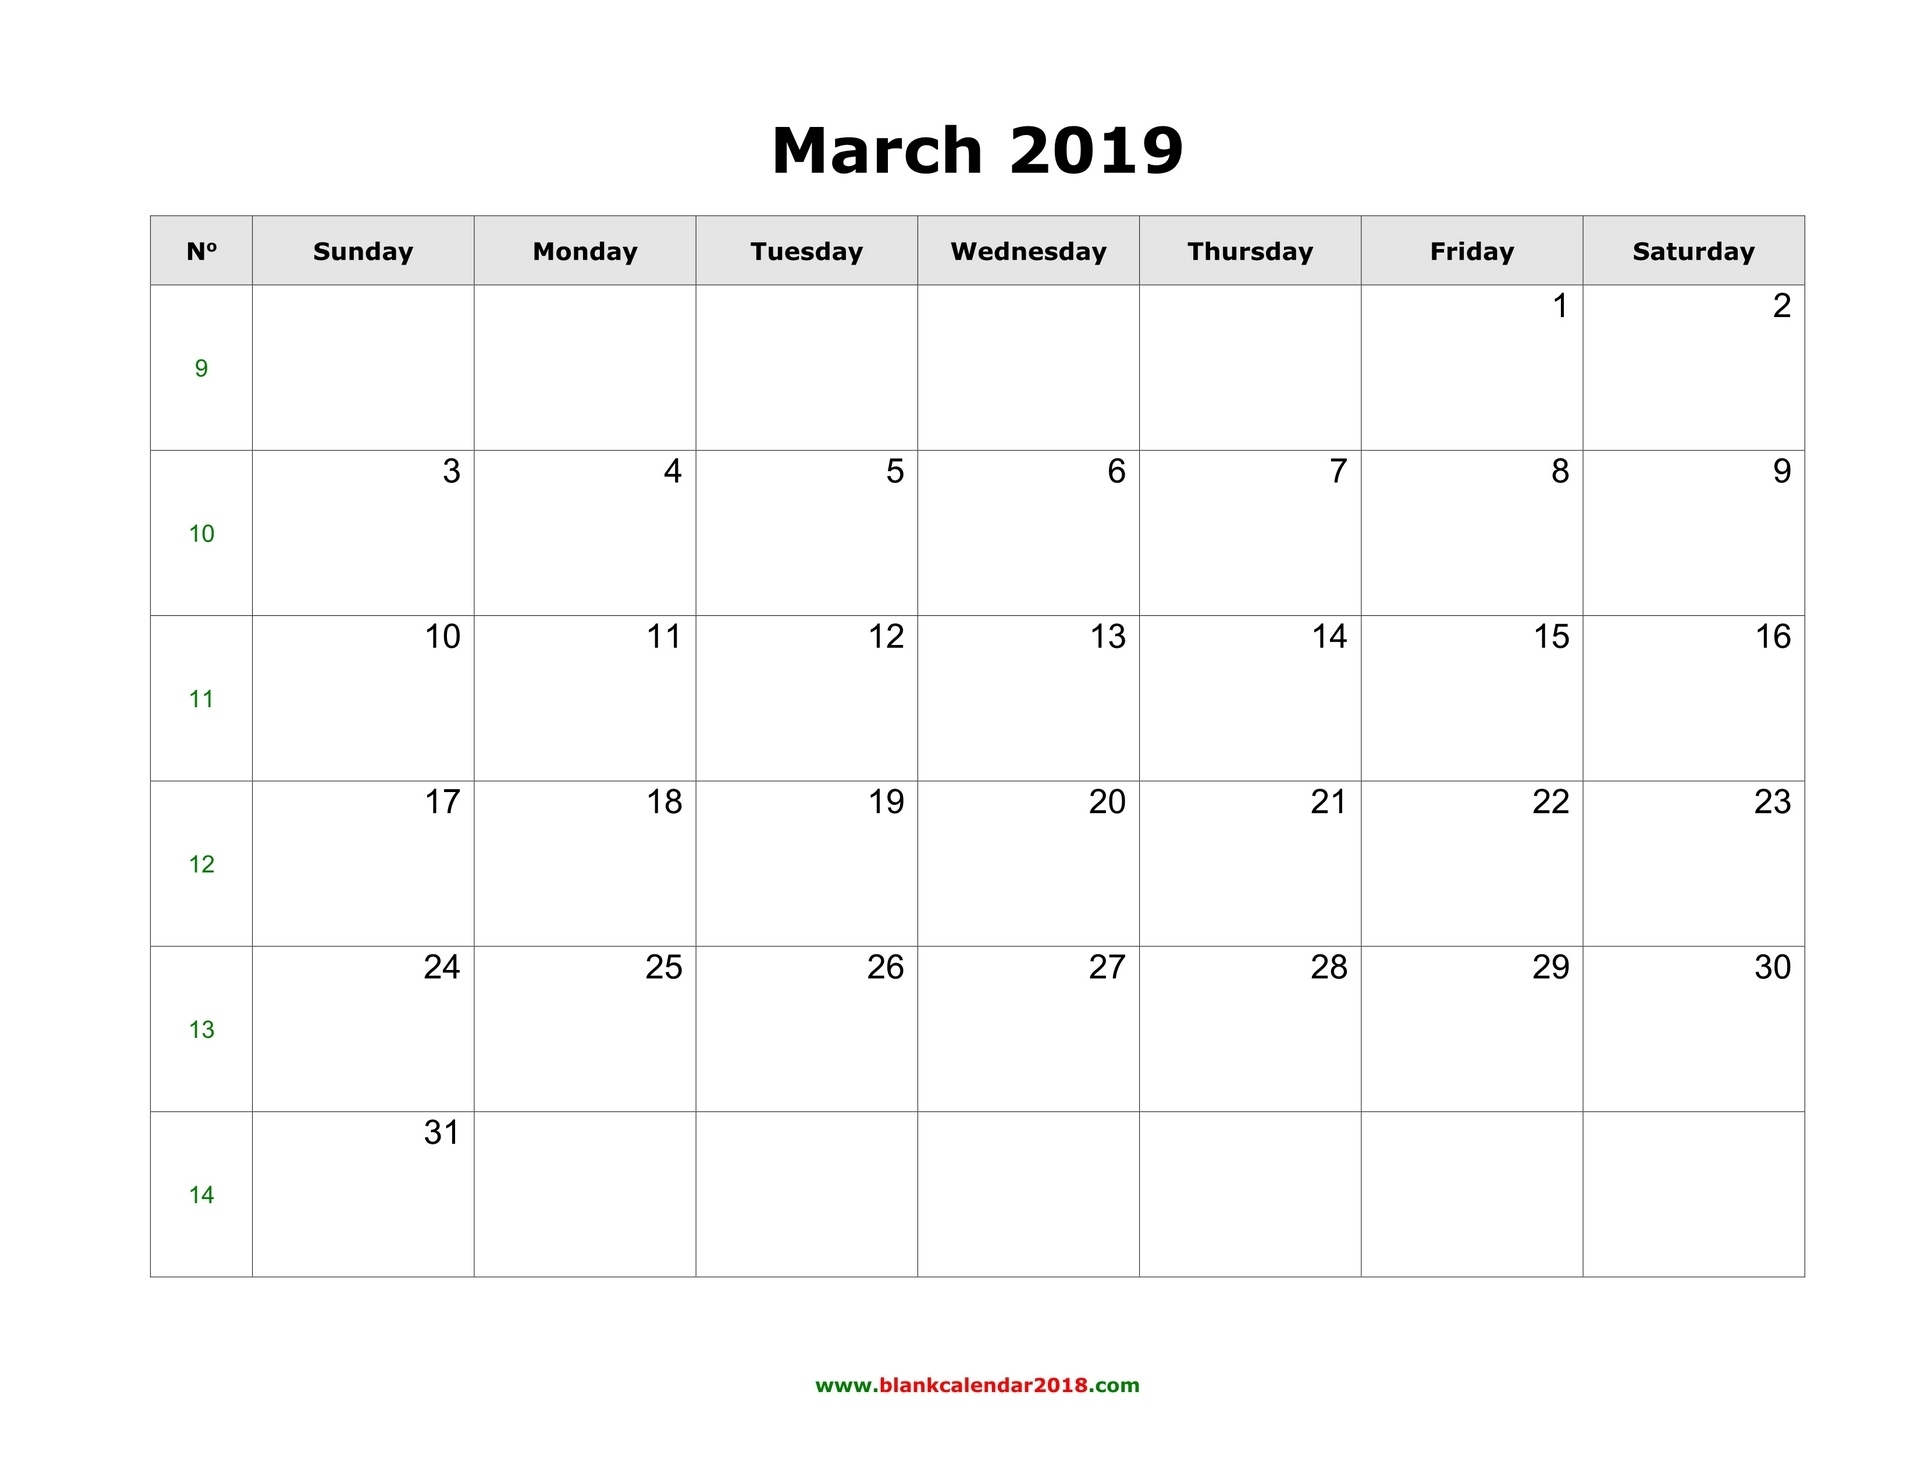 Blank Calendar For March 2019 Calendar To Fill In Template